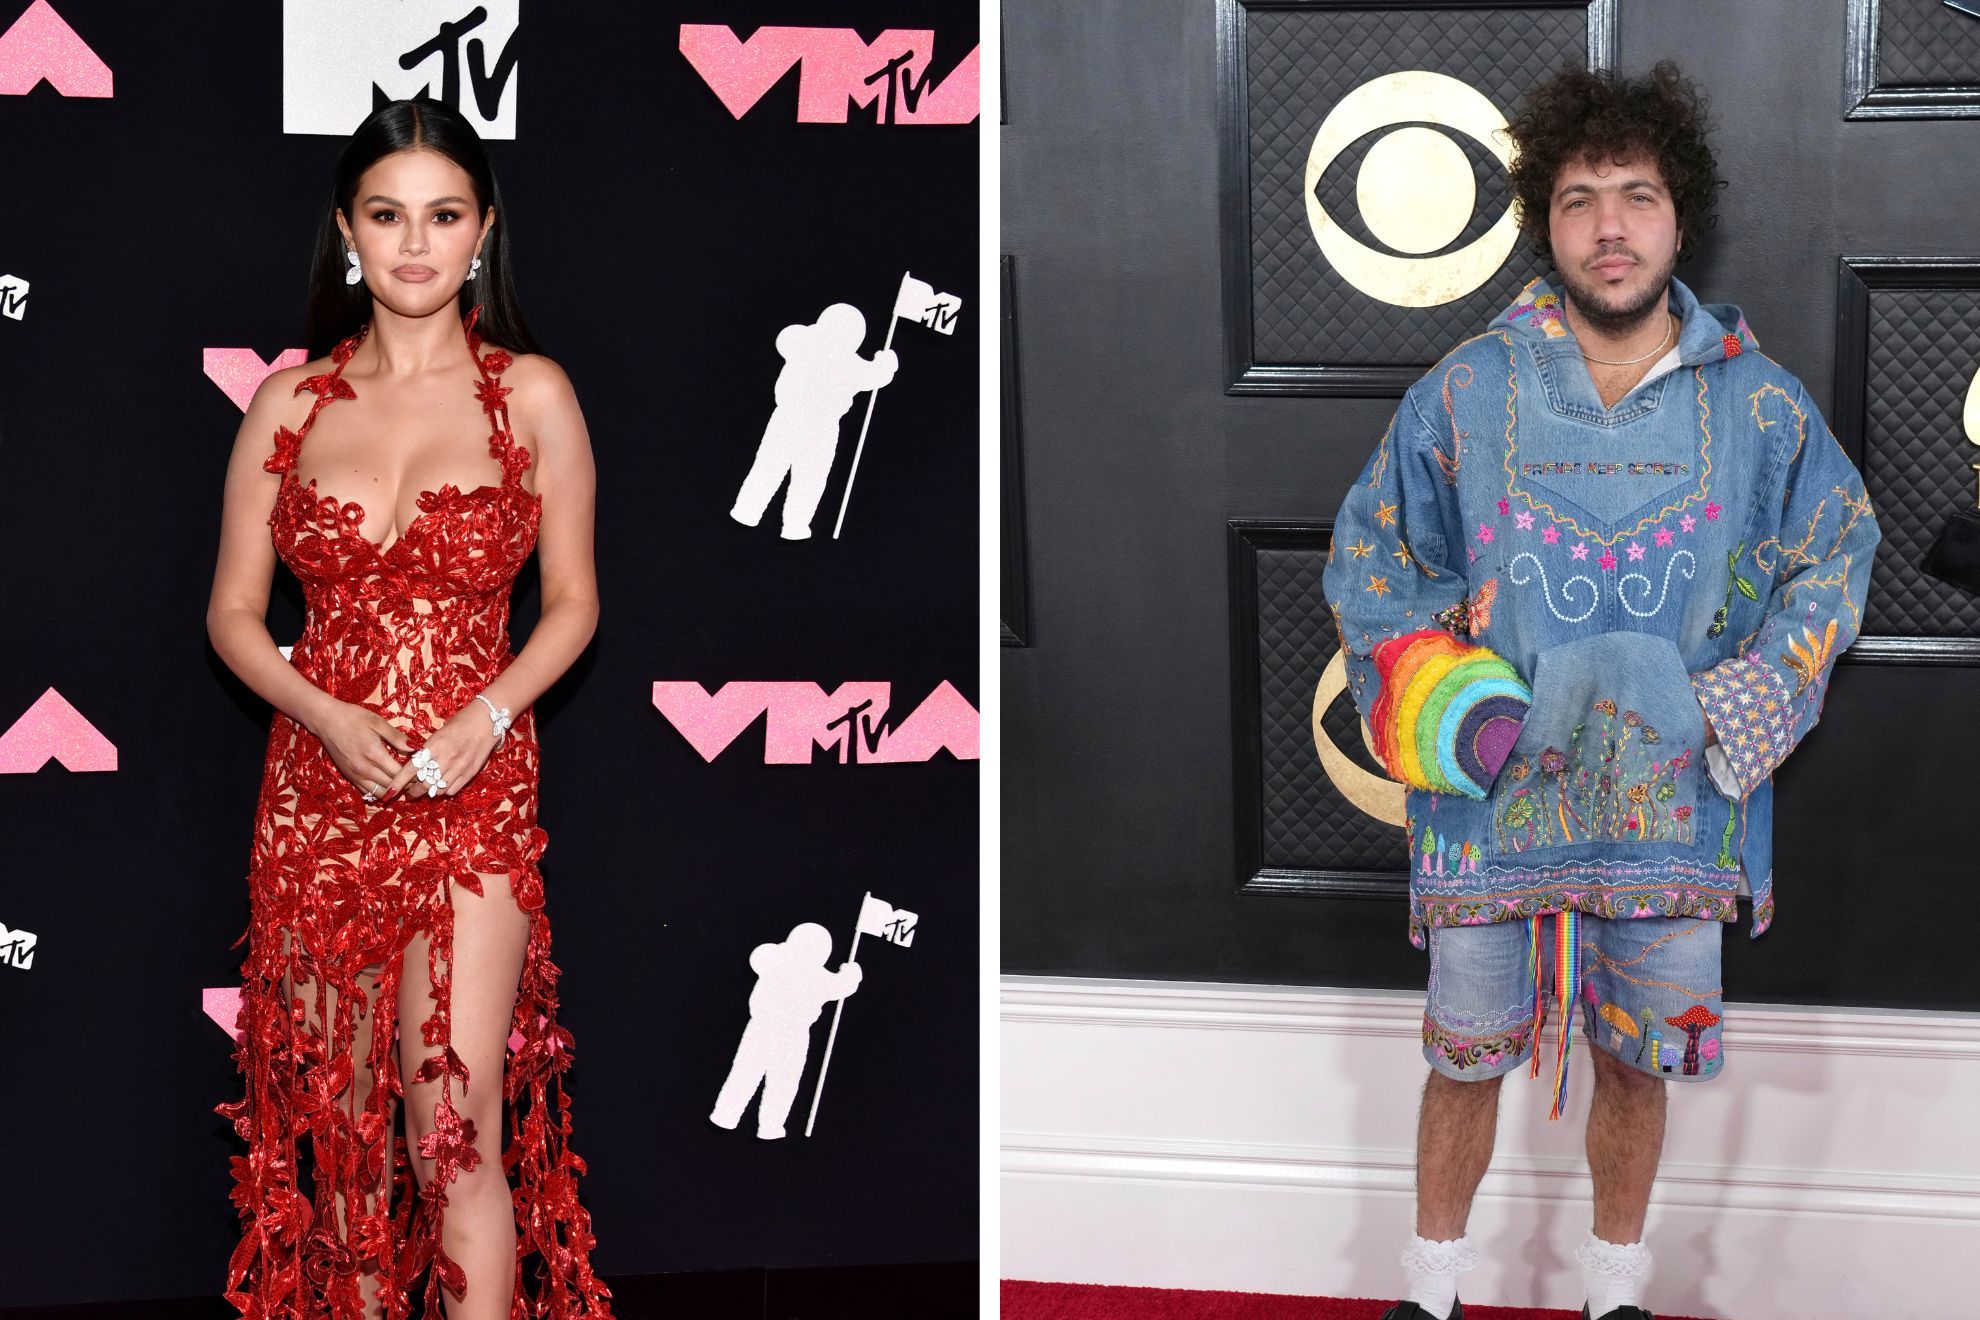 Selena Gomez lashes out at haters who say she downgraded by dating Benny Blanco